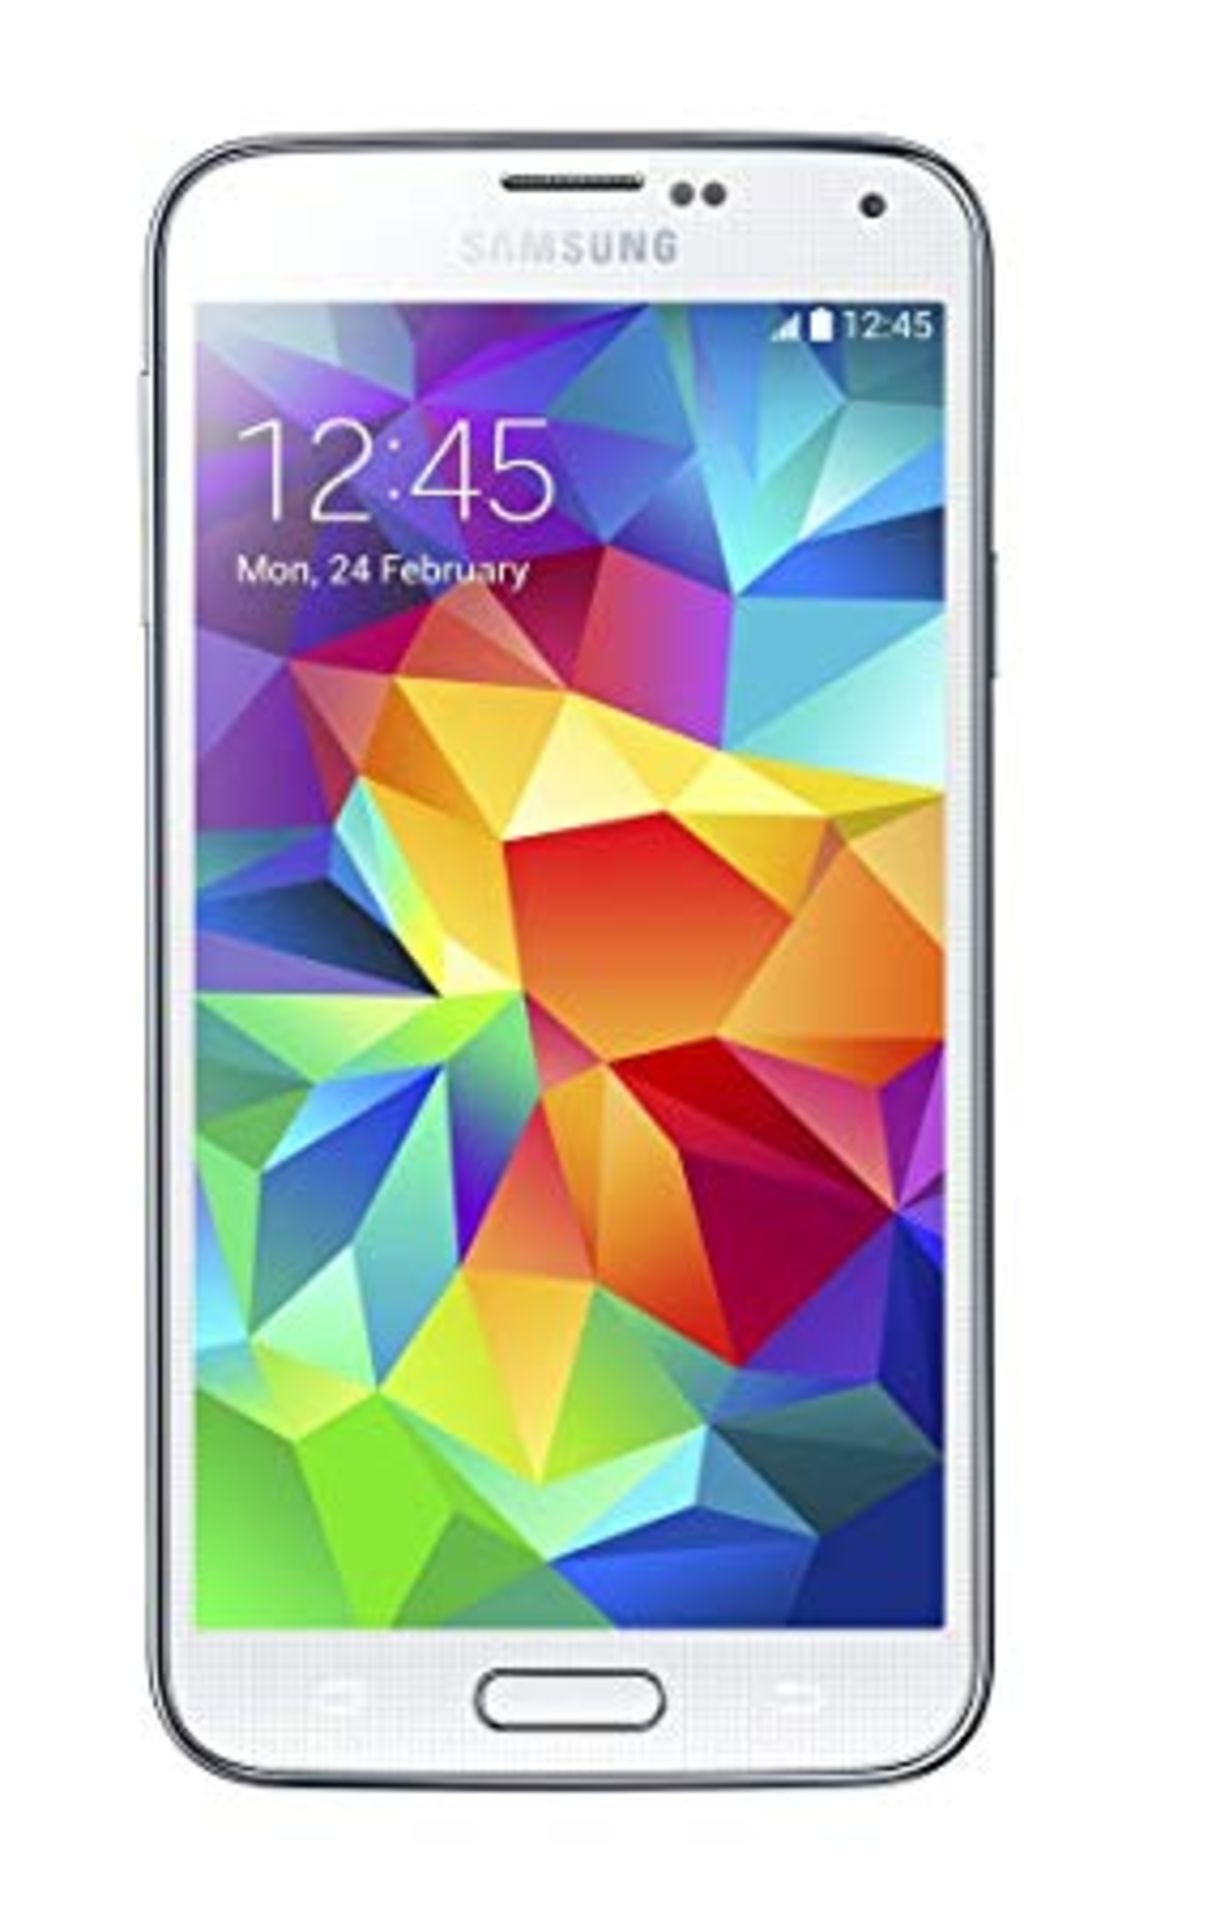 No VAT Grade A Samsung S5 ( G900F) Colours May Vary Item available approx 15 working days after